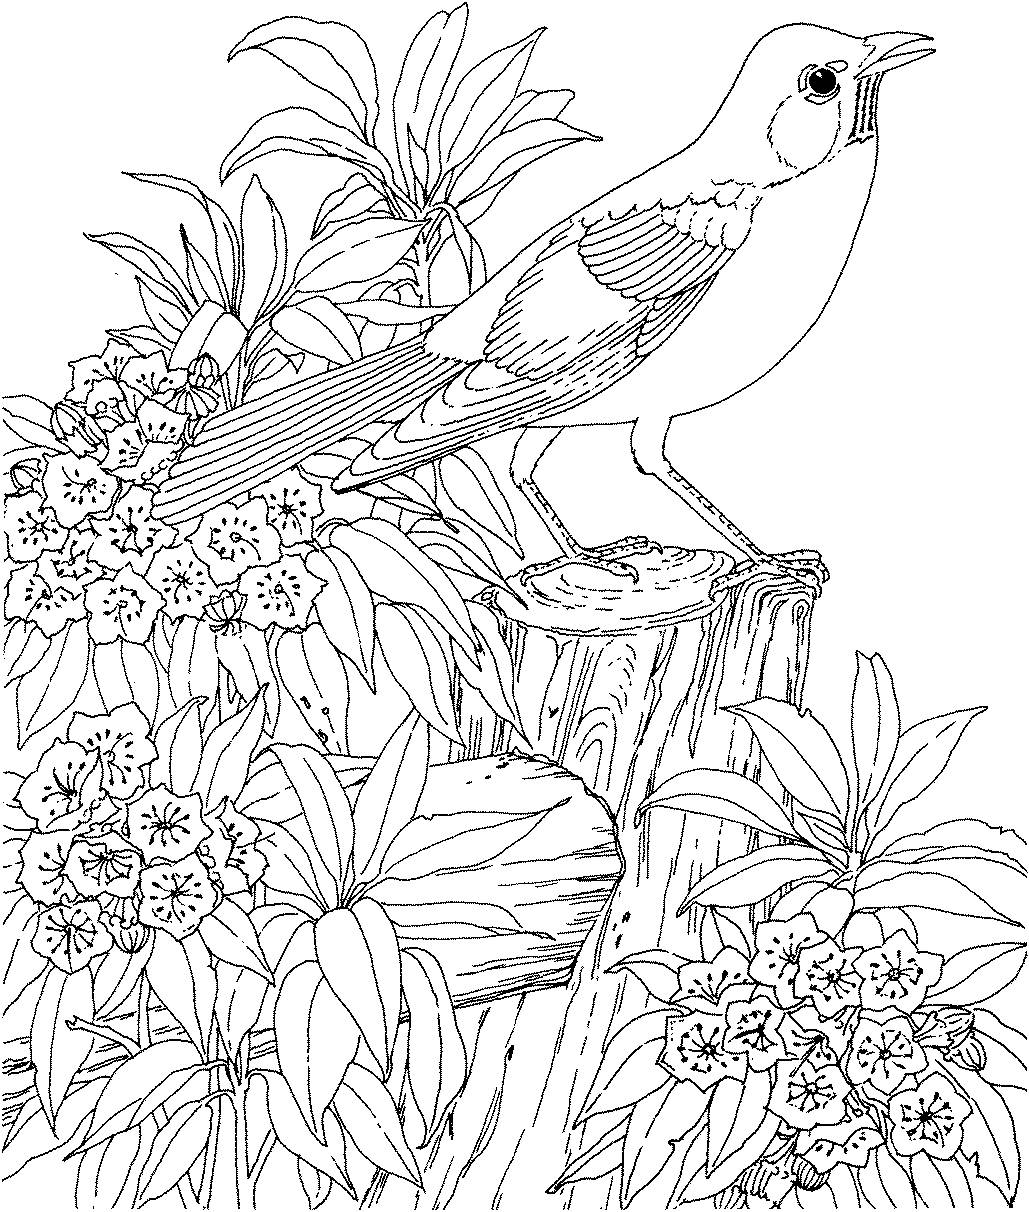  coloring pages for adults – printable coloring pages for adults – adult coloring pages – #12